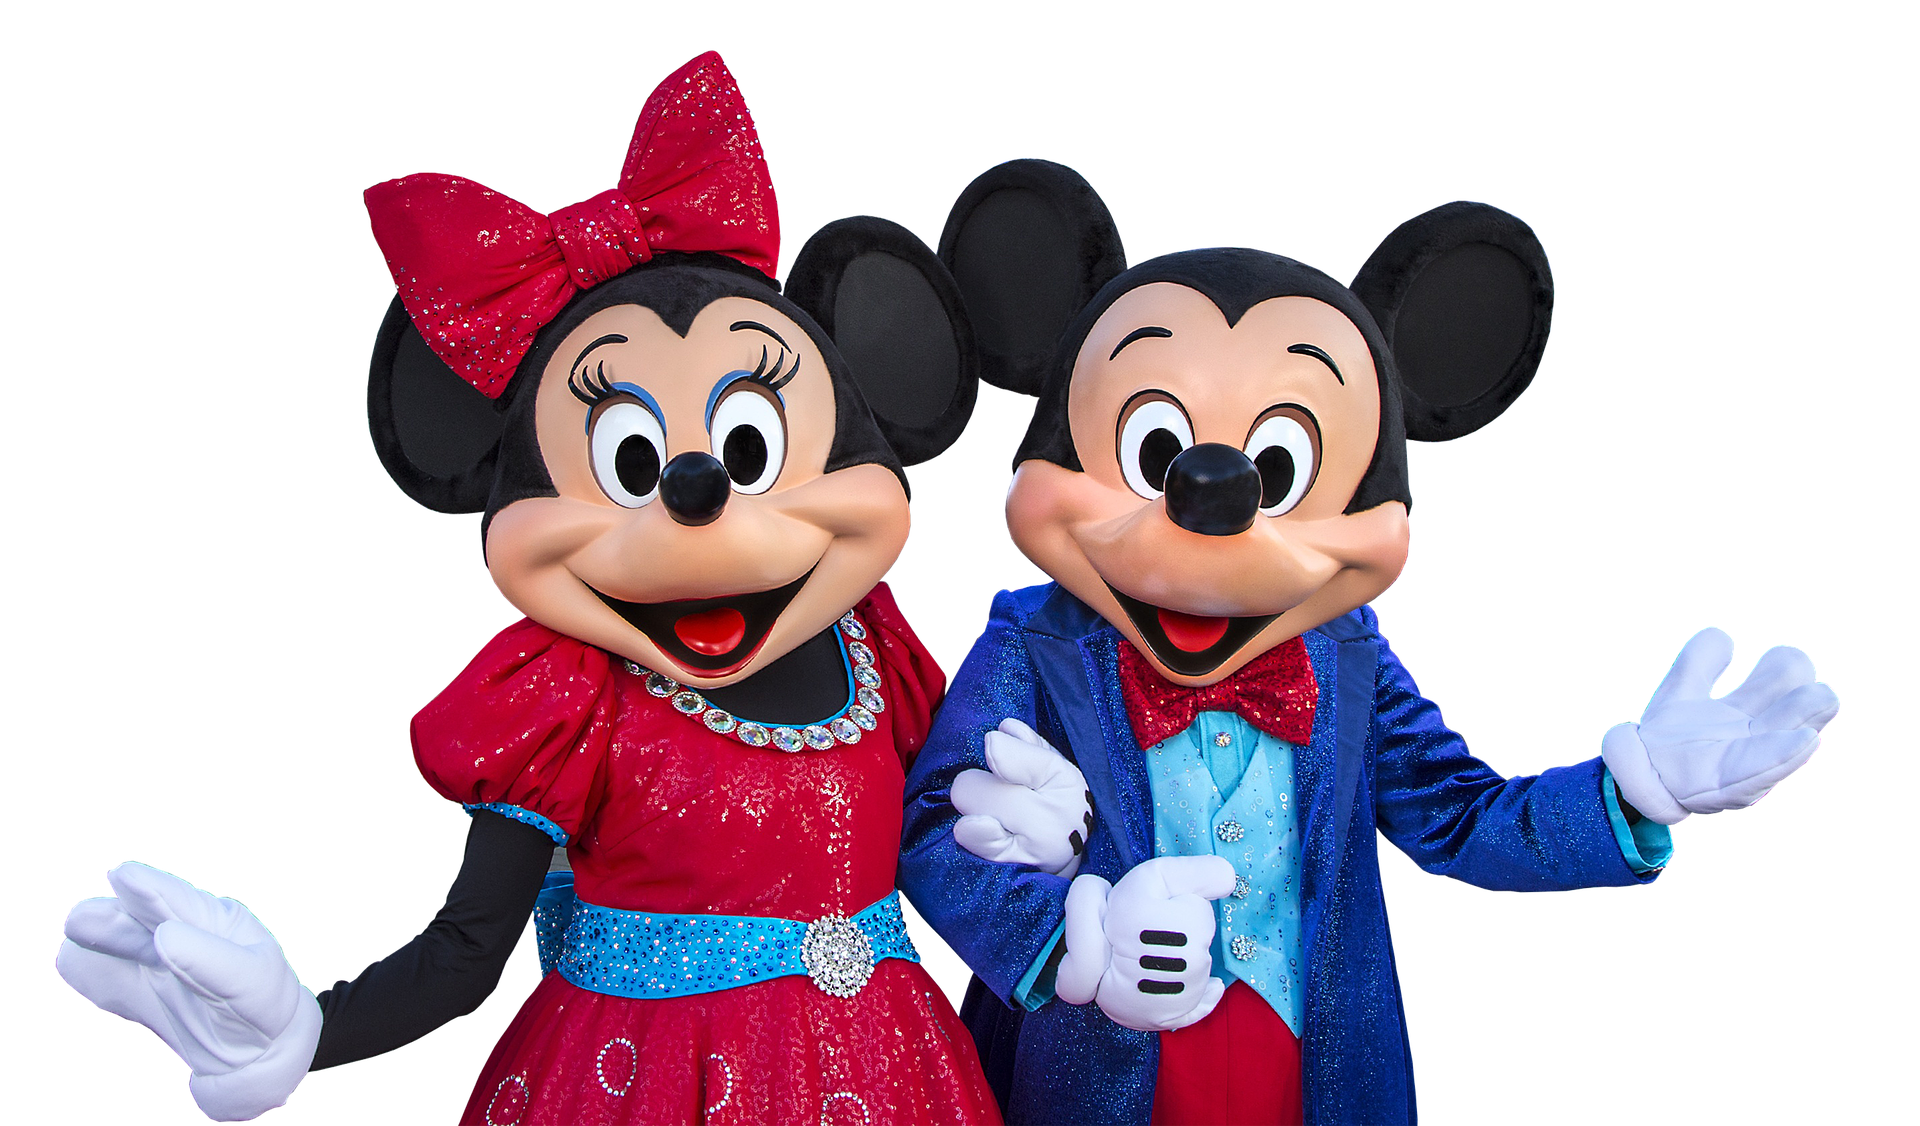 mickey-mouse-2732231_1920.png